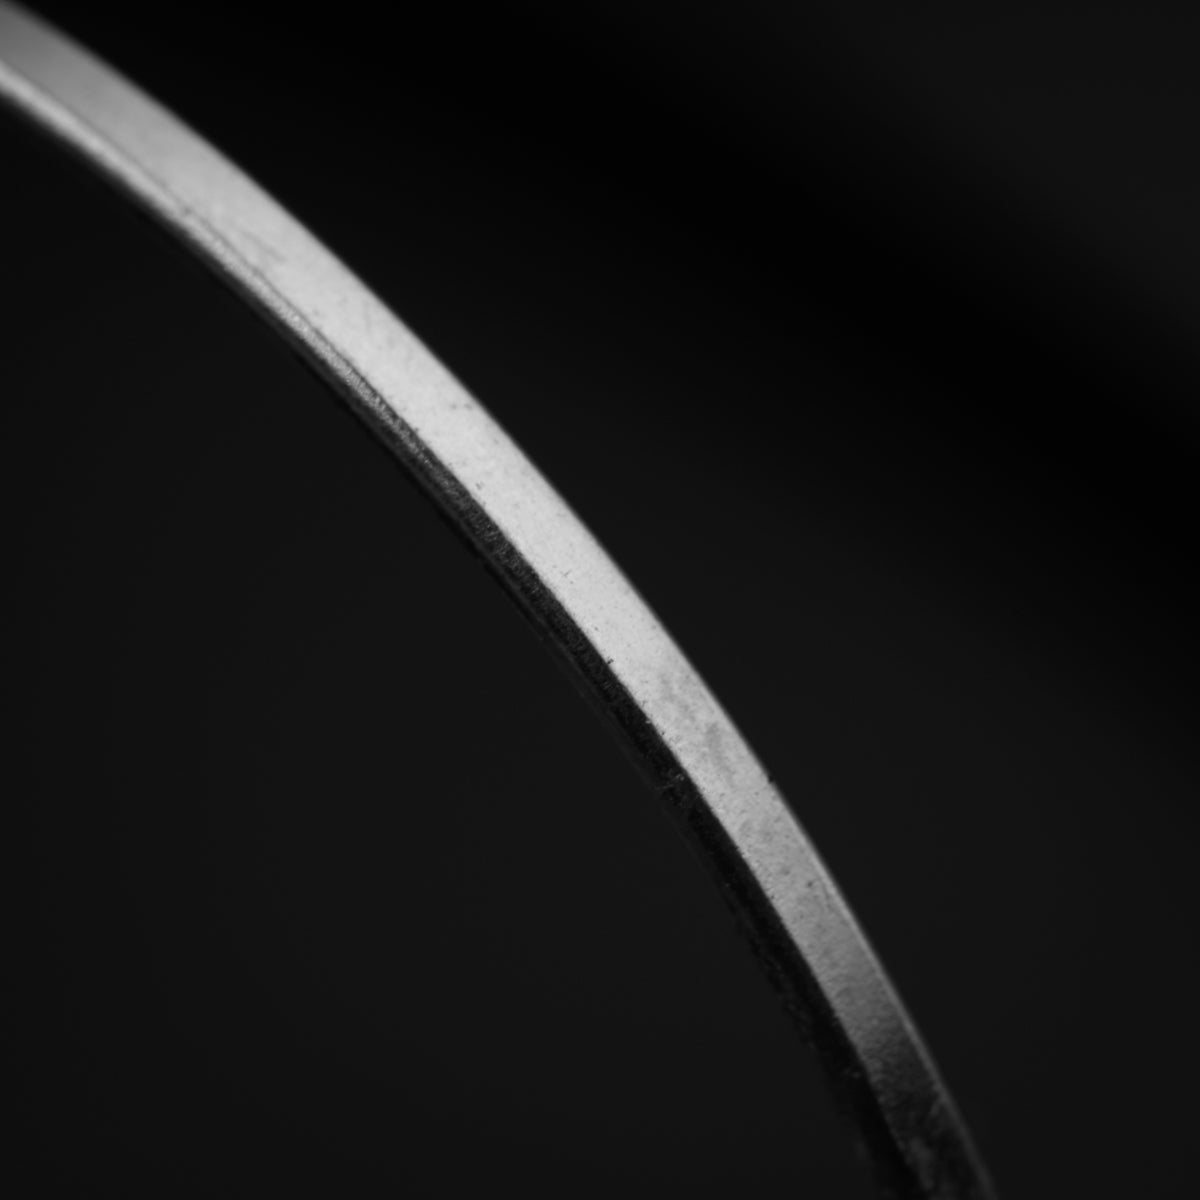 a black and white photo of a curved metal object